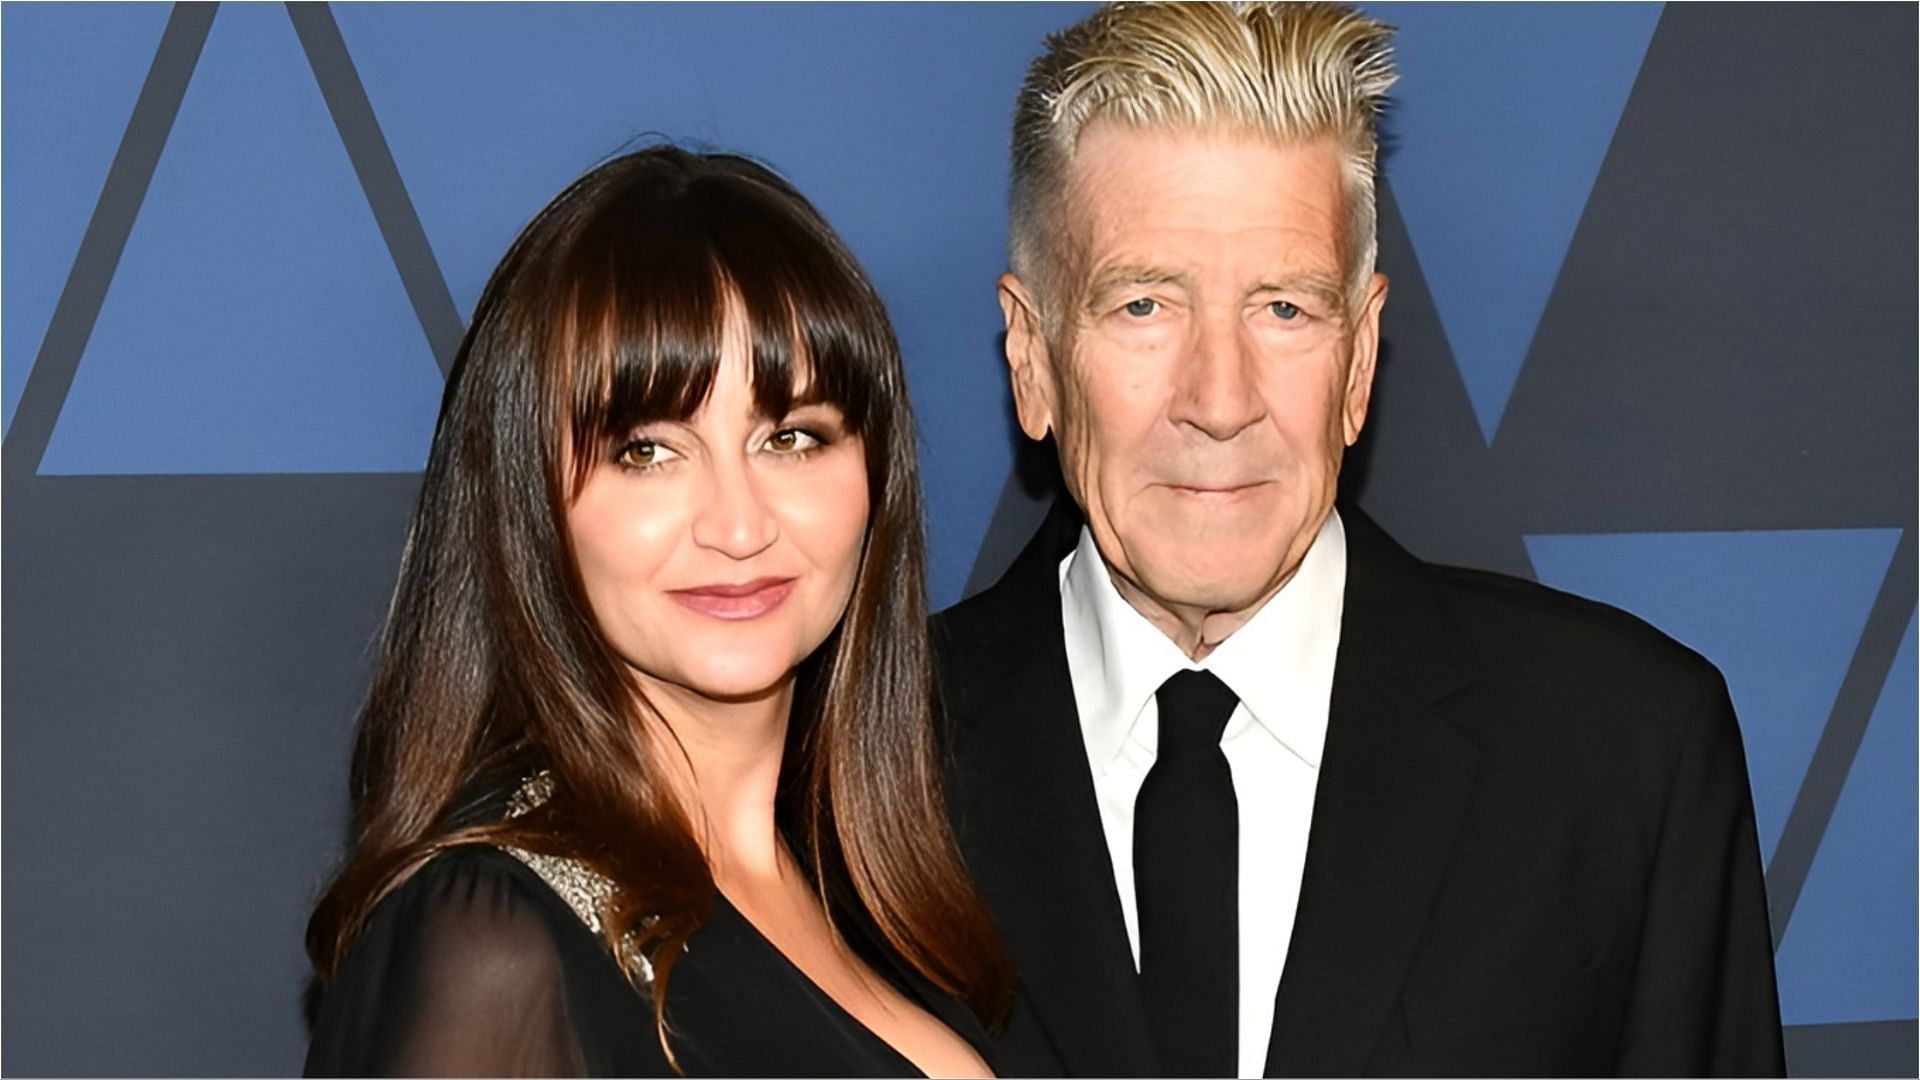 David Lynch and Emily Stofle are getting divorced after being married for around 14 years (Image via BearsFanJordan/X)